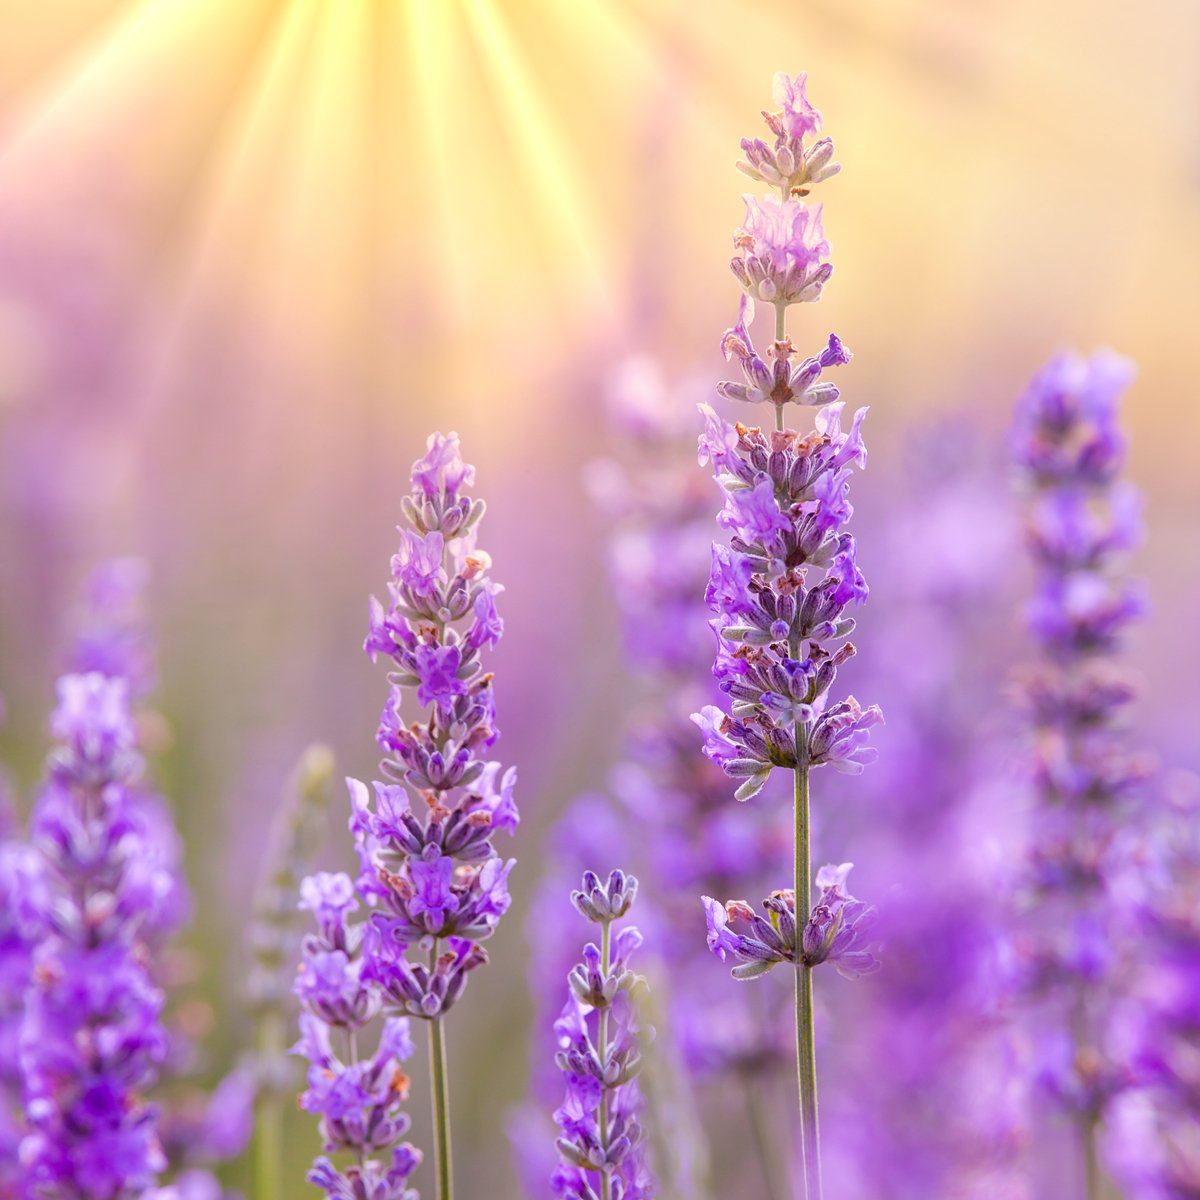 Lavender flowers with sun rays in the background.